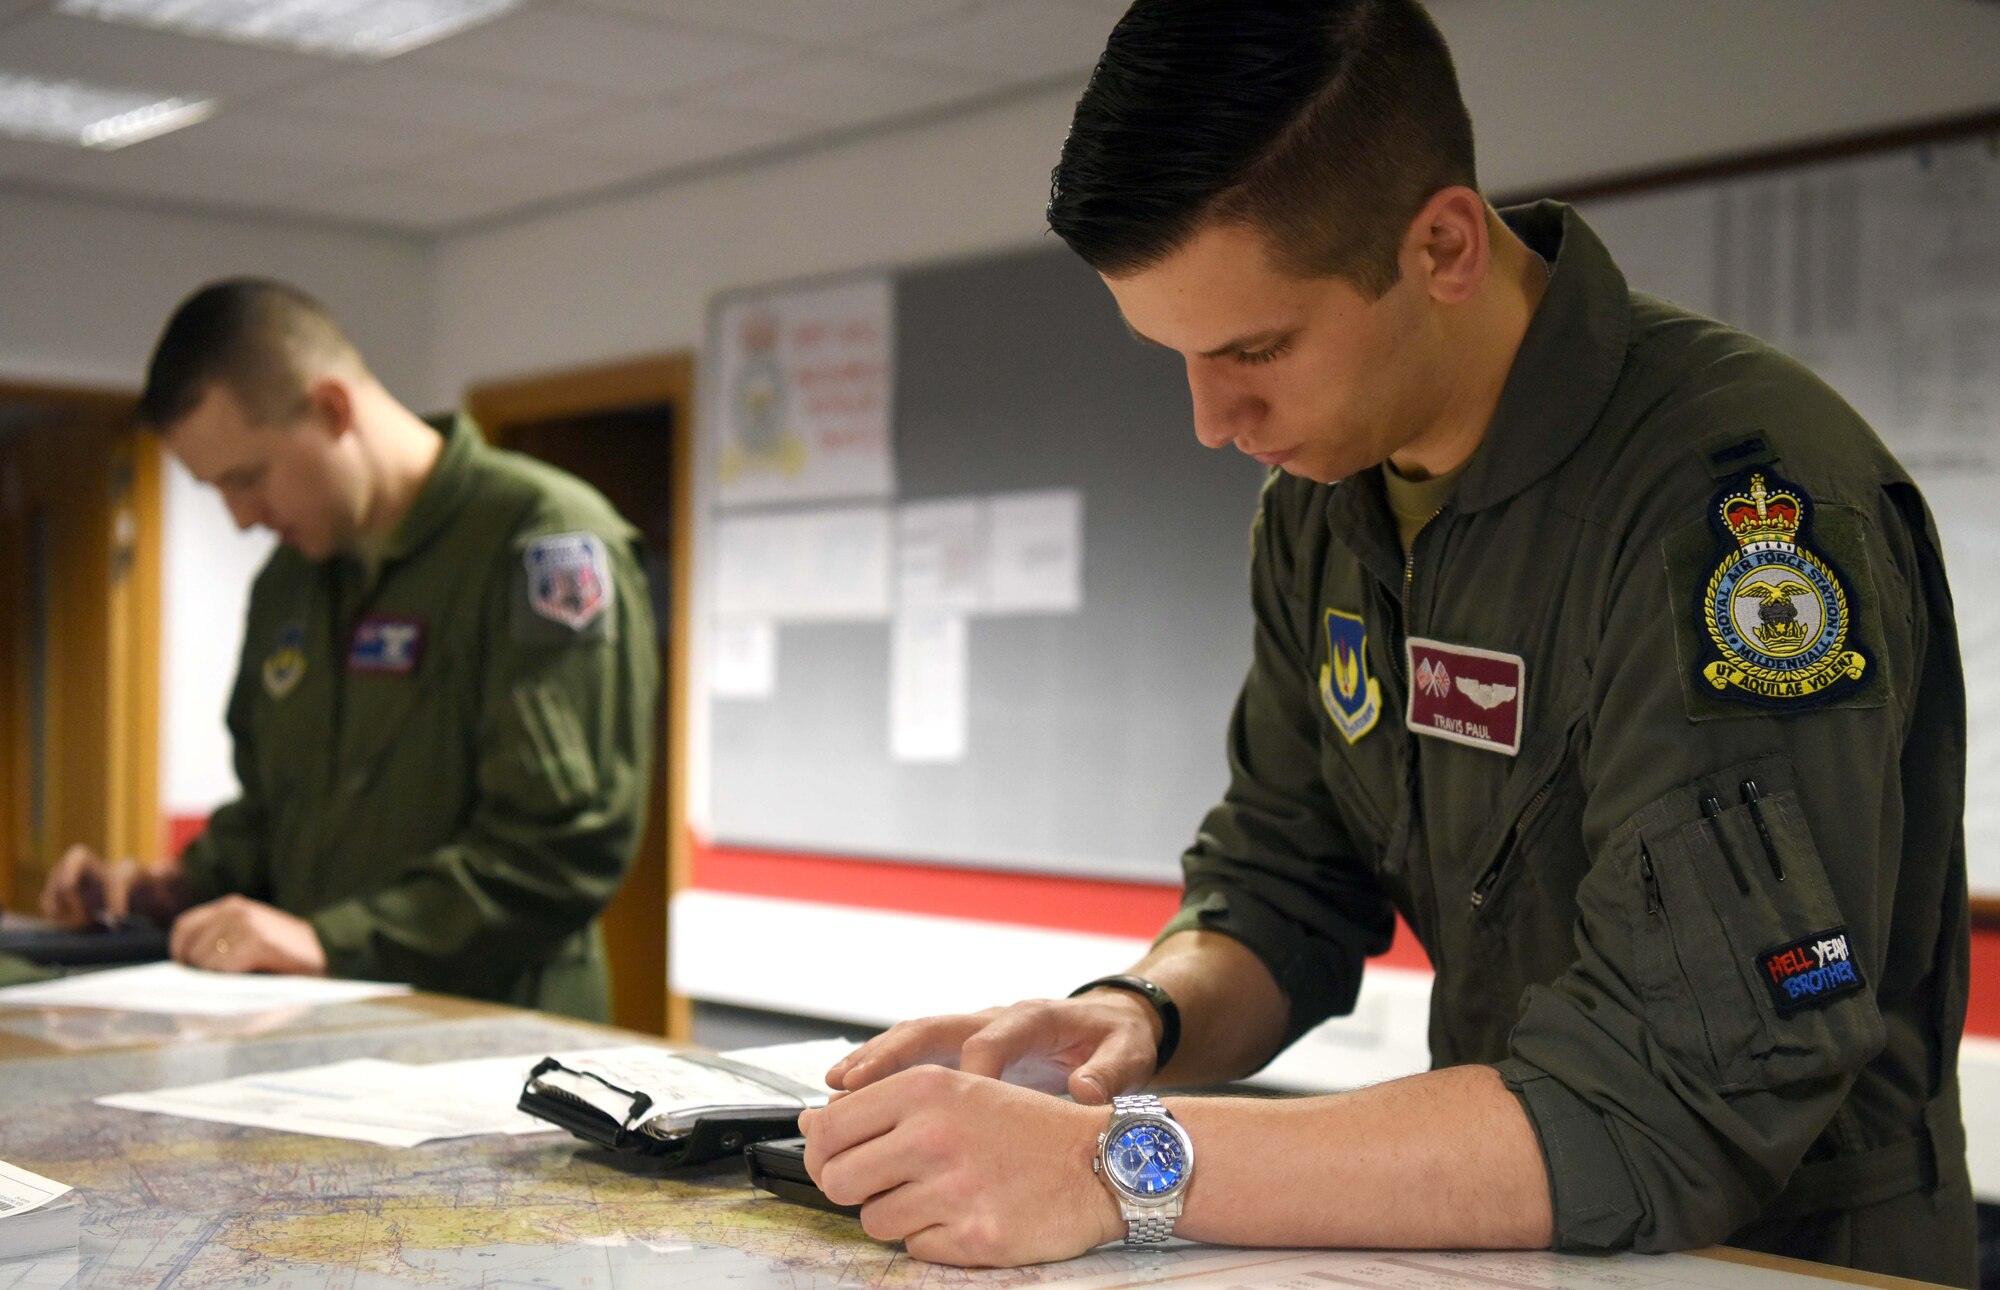 First Lieutenant Travis Paul, 351st Air Refueling Squadron pilot, right, and Tech. Sgt. Grant Ringenberg, 351st ARS boom operator, review flight plans at RAF Mildenhall, England, July 23, 2020. The 351st ARS provides operational air refueling, aeromedical evacuation, airlift and rapid contingency response options for U.S. and NATO fighter, bomber and support and reconnaissance aircraft in the European and African theater of operations. (U.S. Air Force photo by Senior Airman Brandon Esau)